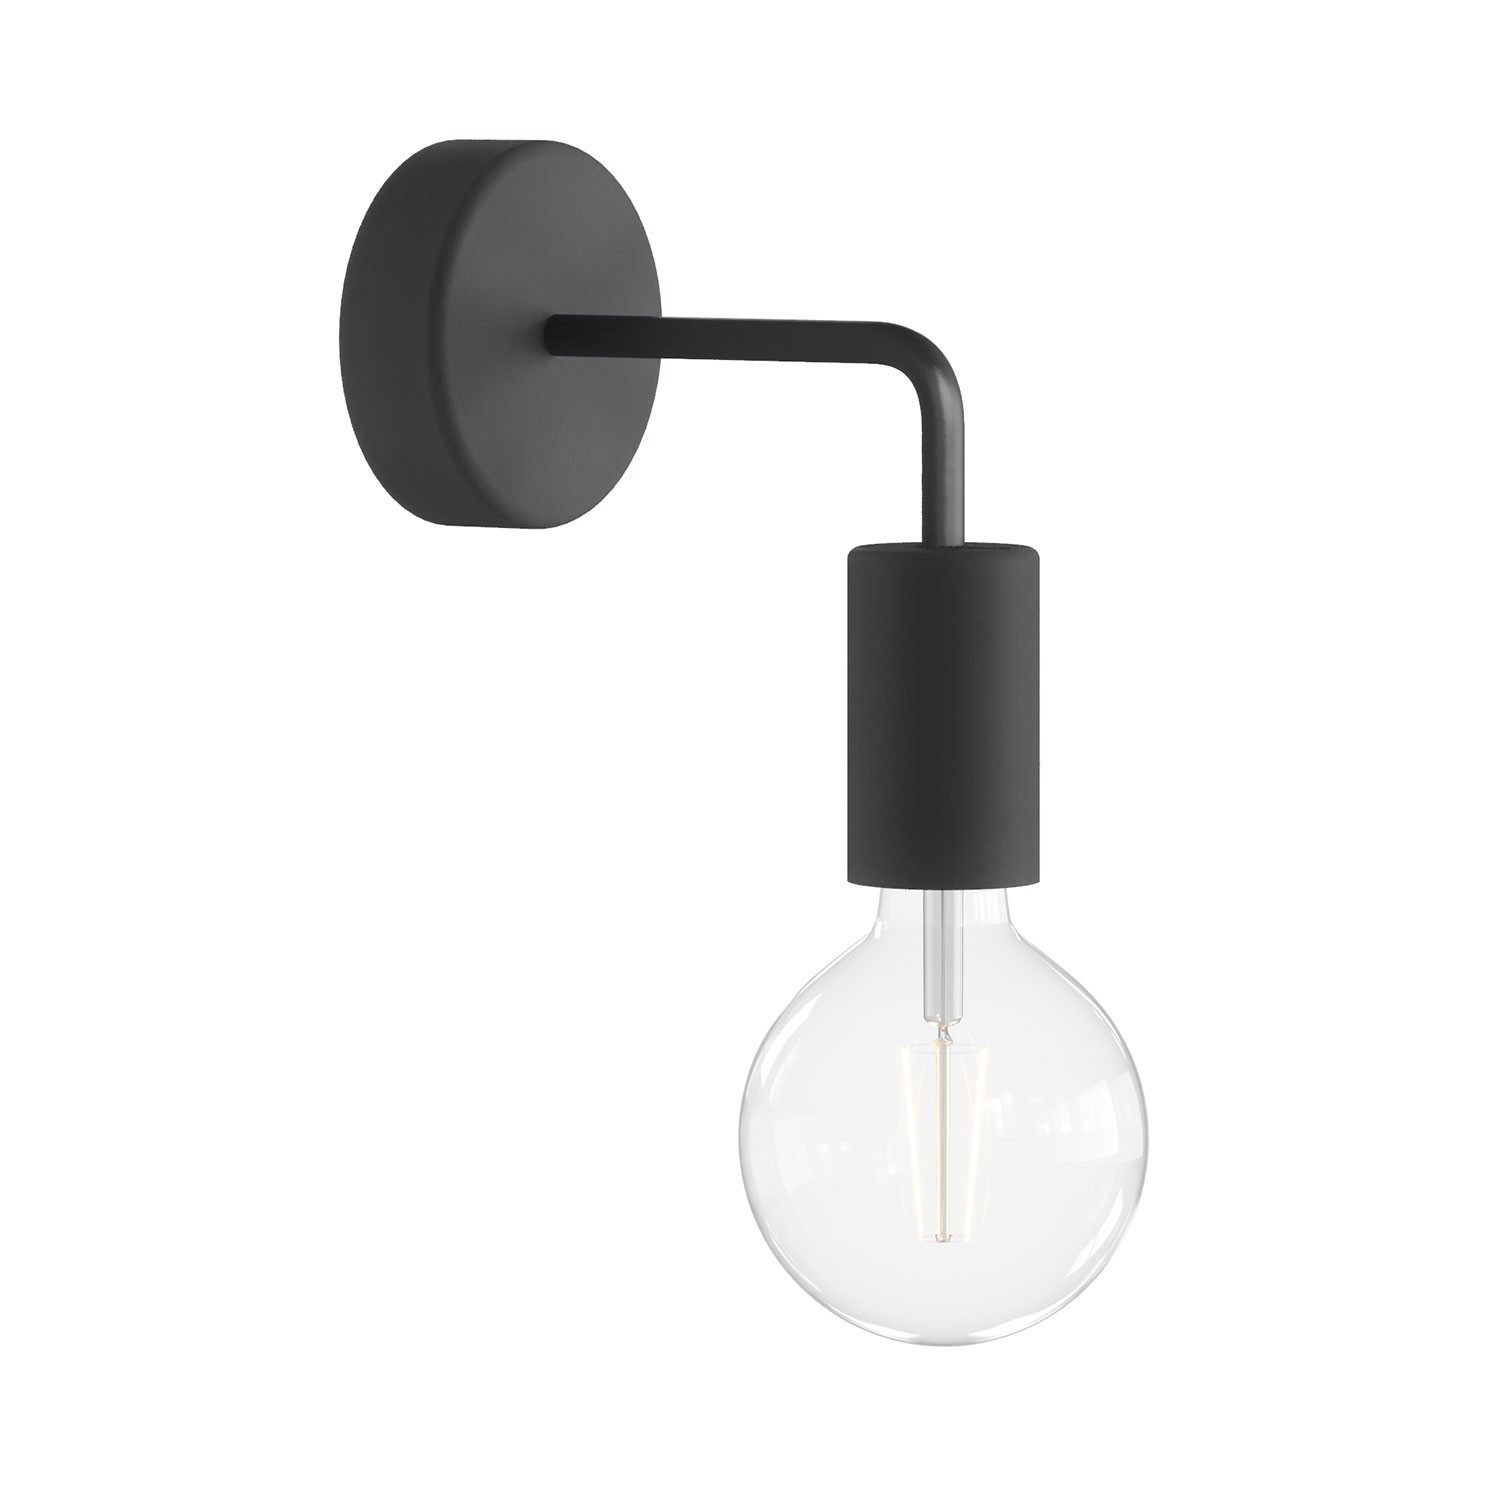 Fermaluce EIVA ELEGANT with L-shaped extension, ceiling rose and lamp holder IP65 waterproof